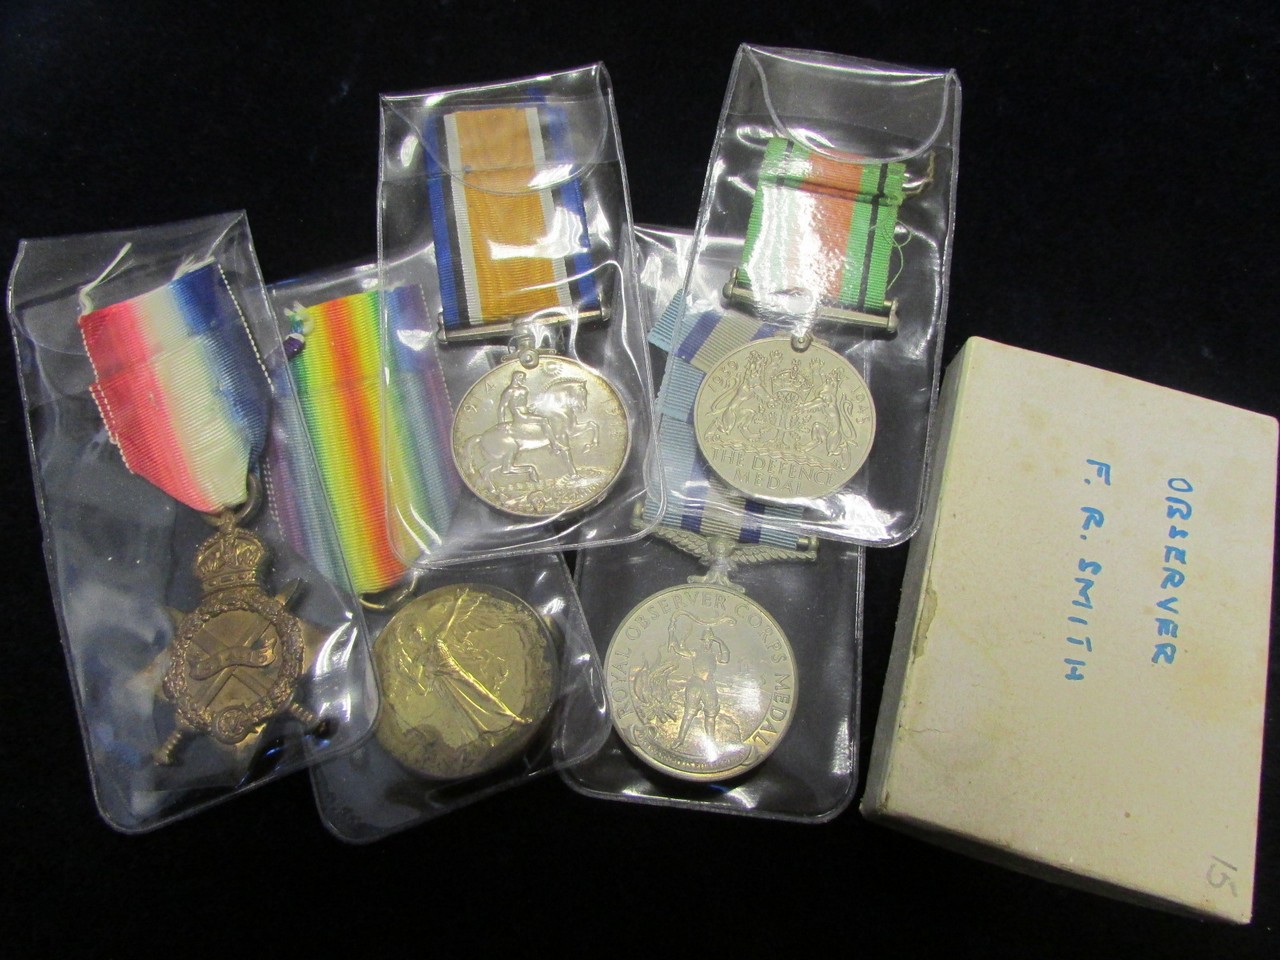 1915 Star Trio, Defence Medal and Royal Observer Corps Medal (BRITT: OMN). Trio named 3246 Pte F R